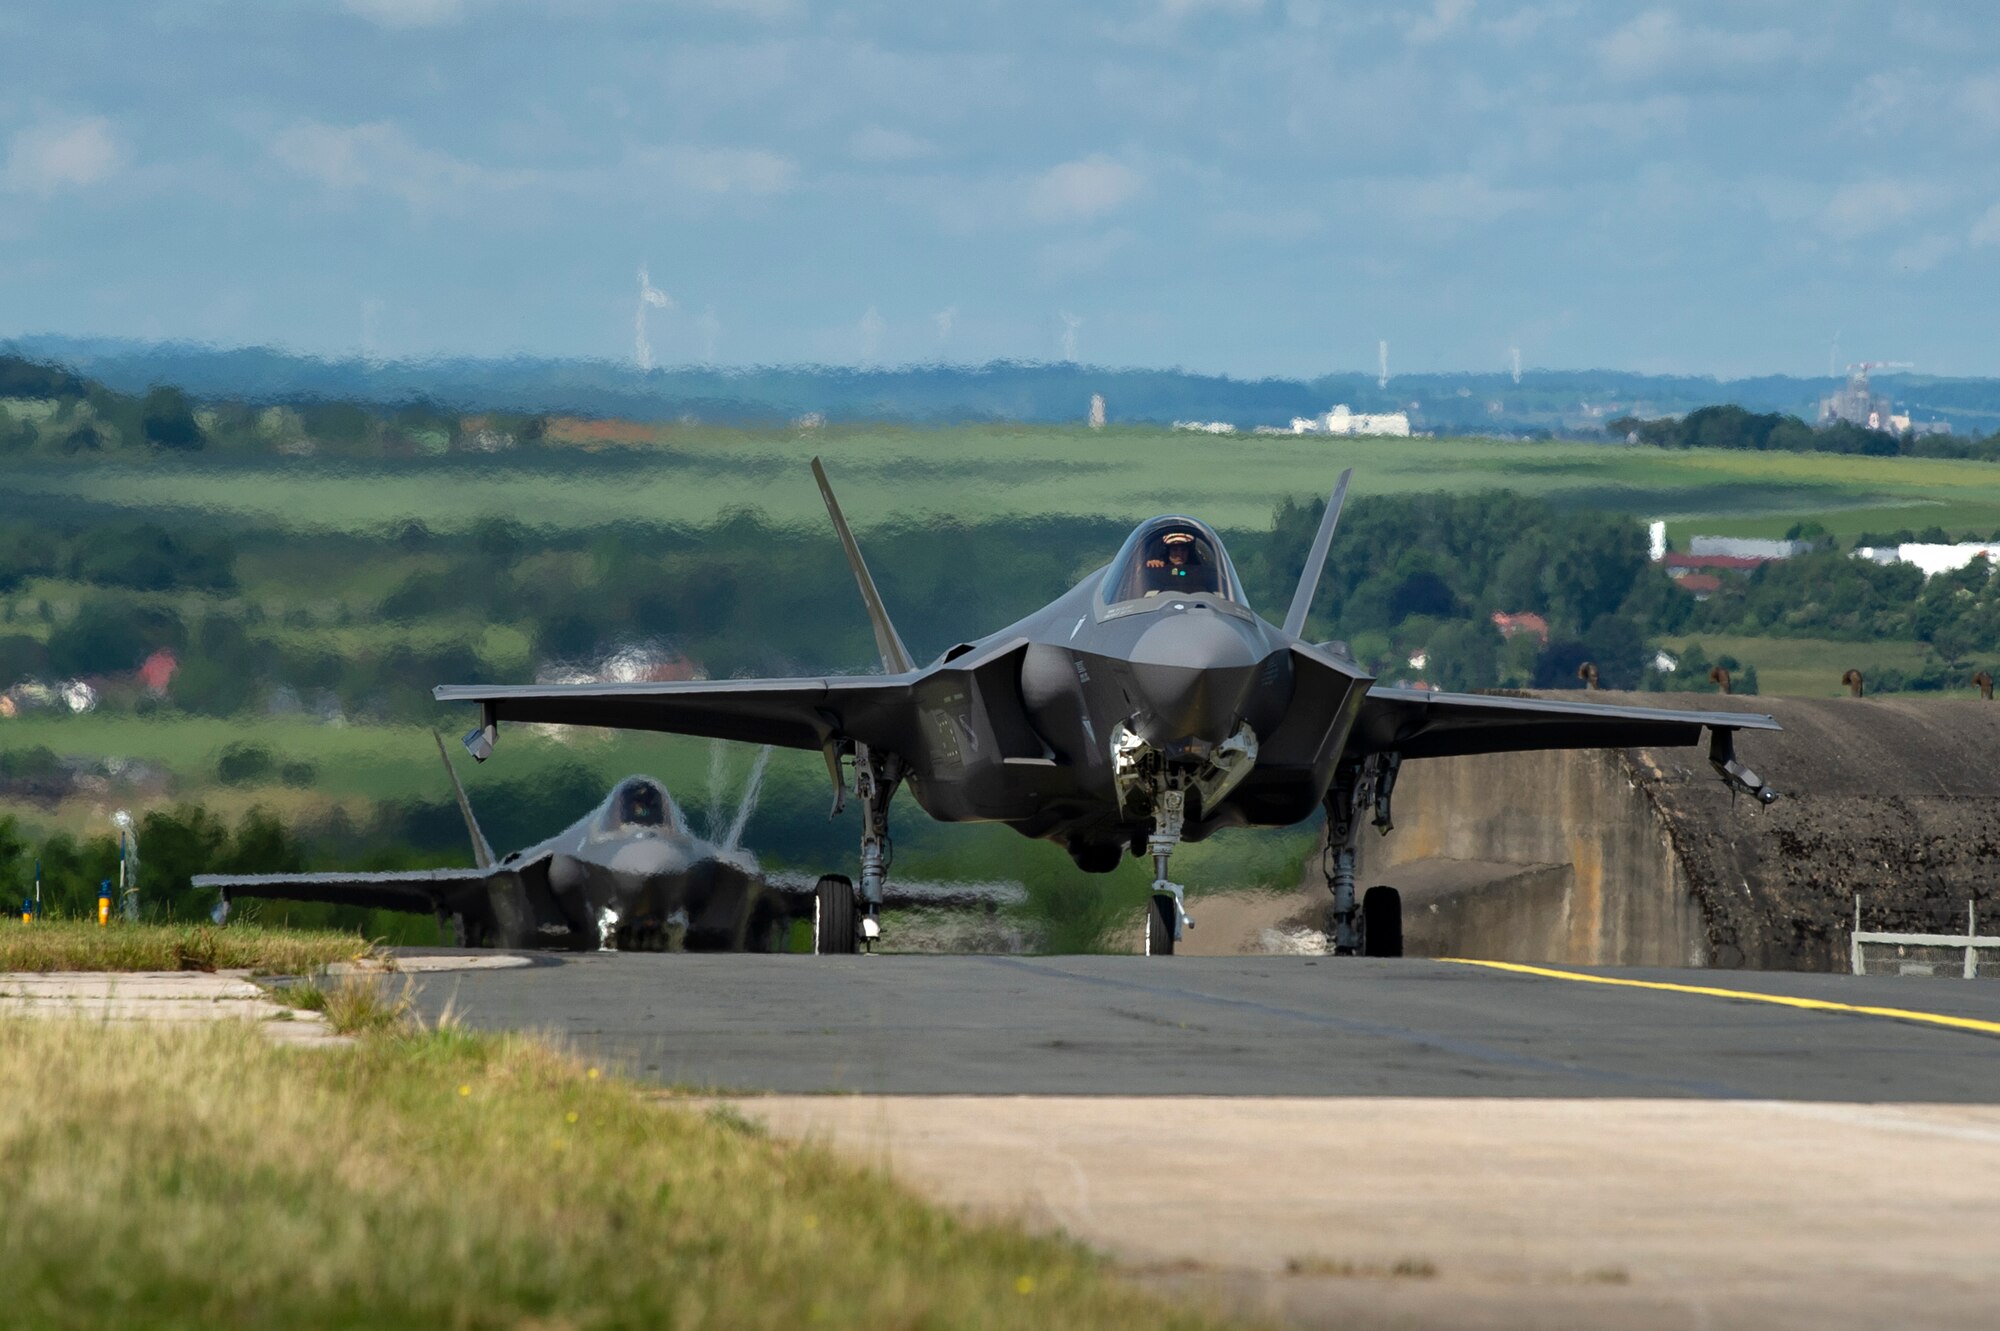 U.S. Air Force F-35A Lightning II fighter aircraft, assigned to the 421st Fighter Squadron, Hill Air Force Base, Utah, taxi on the flightline at Spangdahlem Air Base, Germany, June 11, 2019. Multiple F-35s arrived as part of a Theater Security Package. The aircraft have a unique combination of stealth, speed, and agility, making them some of the best dominance fighters in the world. (U.S. Air Force photo by Airman 1st Class Valerie Seelye)